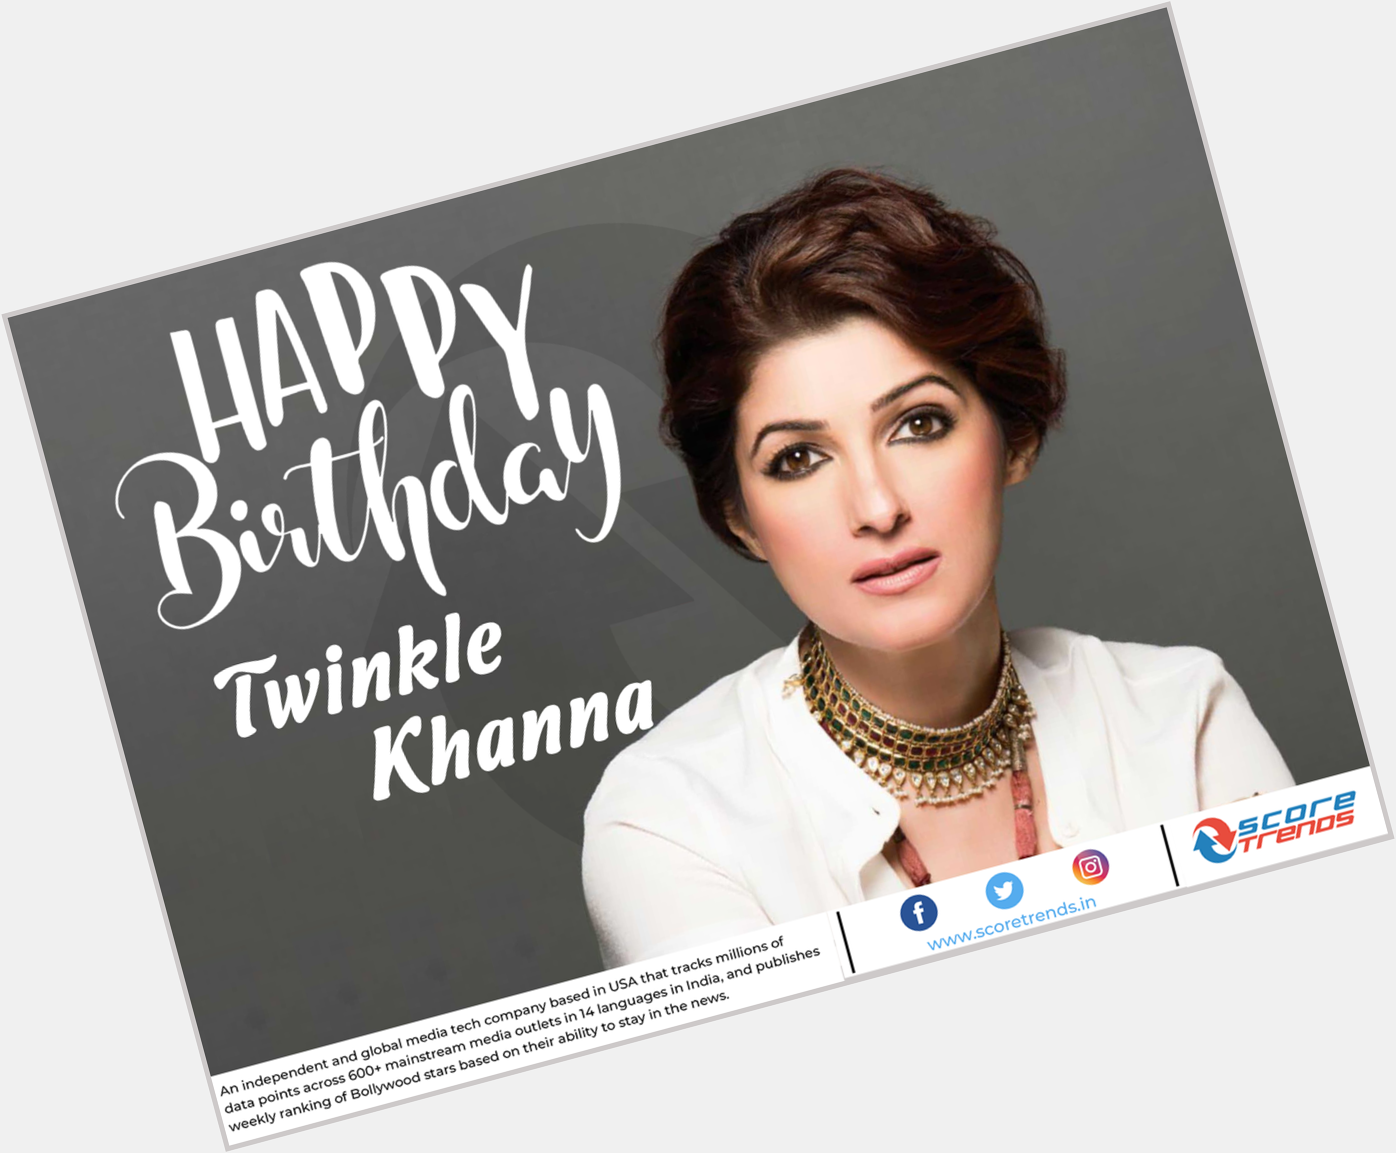 Score Trends wishes Twinkle Khanna a Happy Birthday!! 